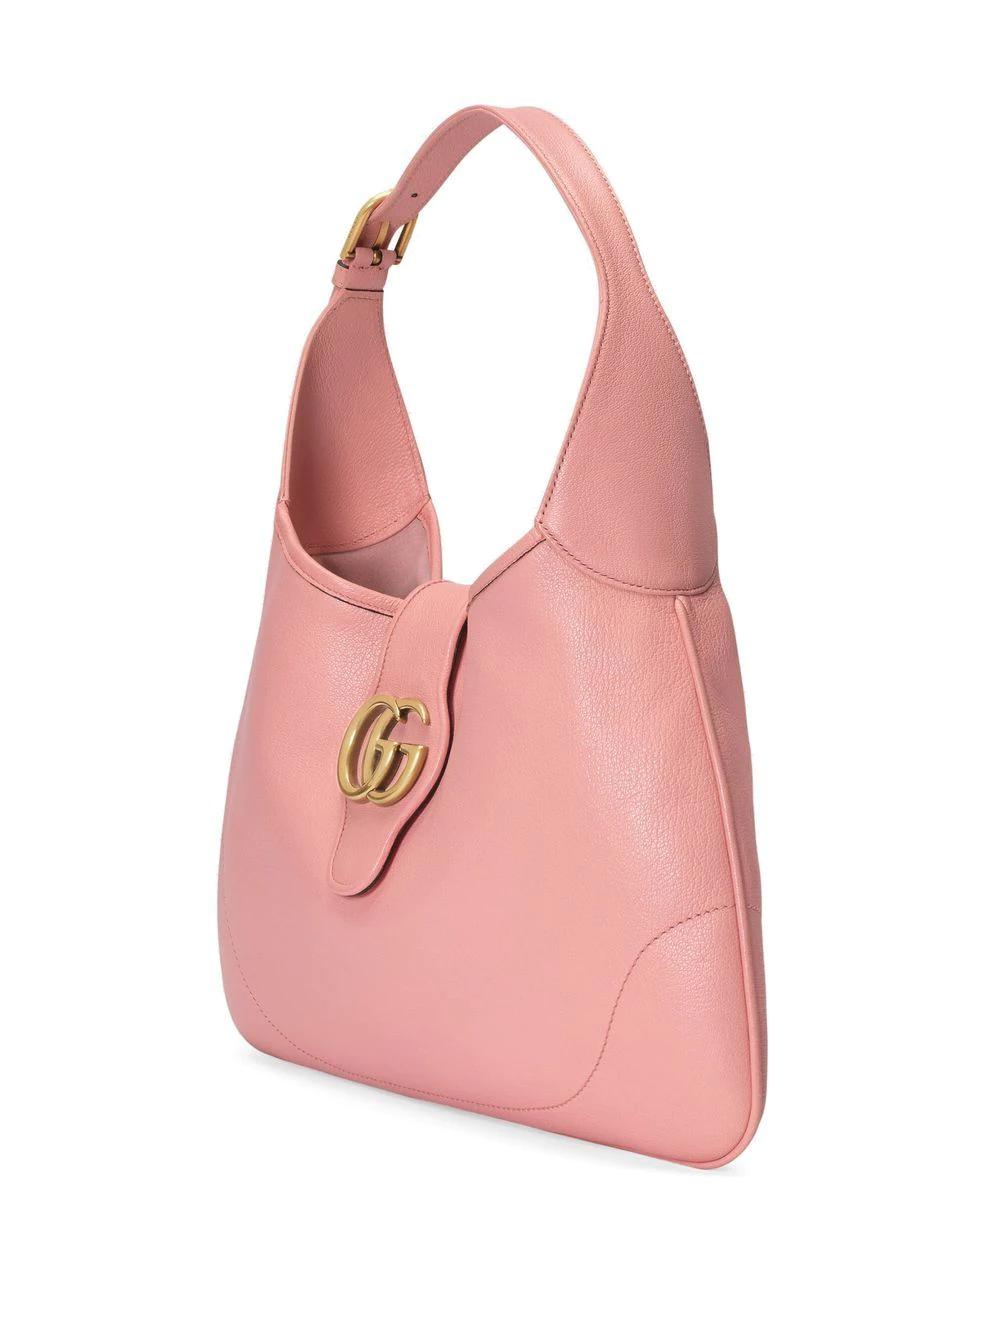 Shop Gucci Feminine And Chic: Ss23 Handbag In Wild Rose In Pink